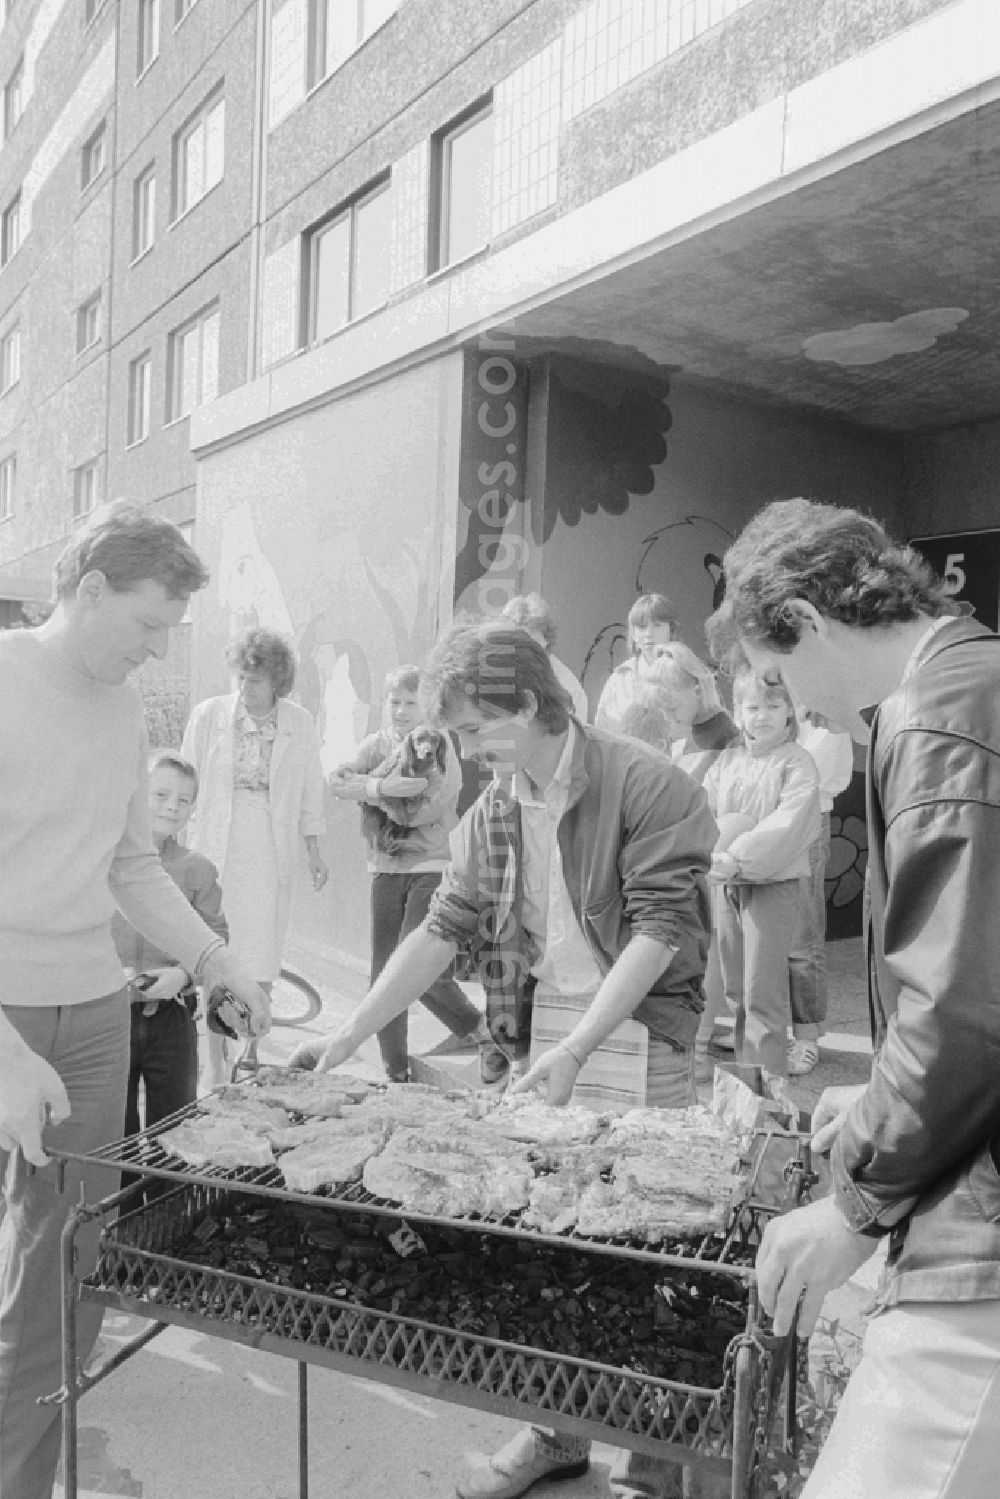 GDR image archive: Berlin - Tenants of a block of residential area barbecue in common on the doorstep in Berlin, the former capital of the GDR, the German Democratic Republic